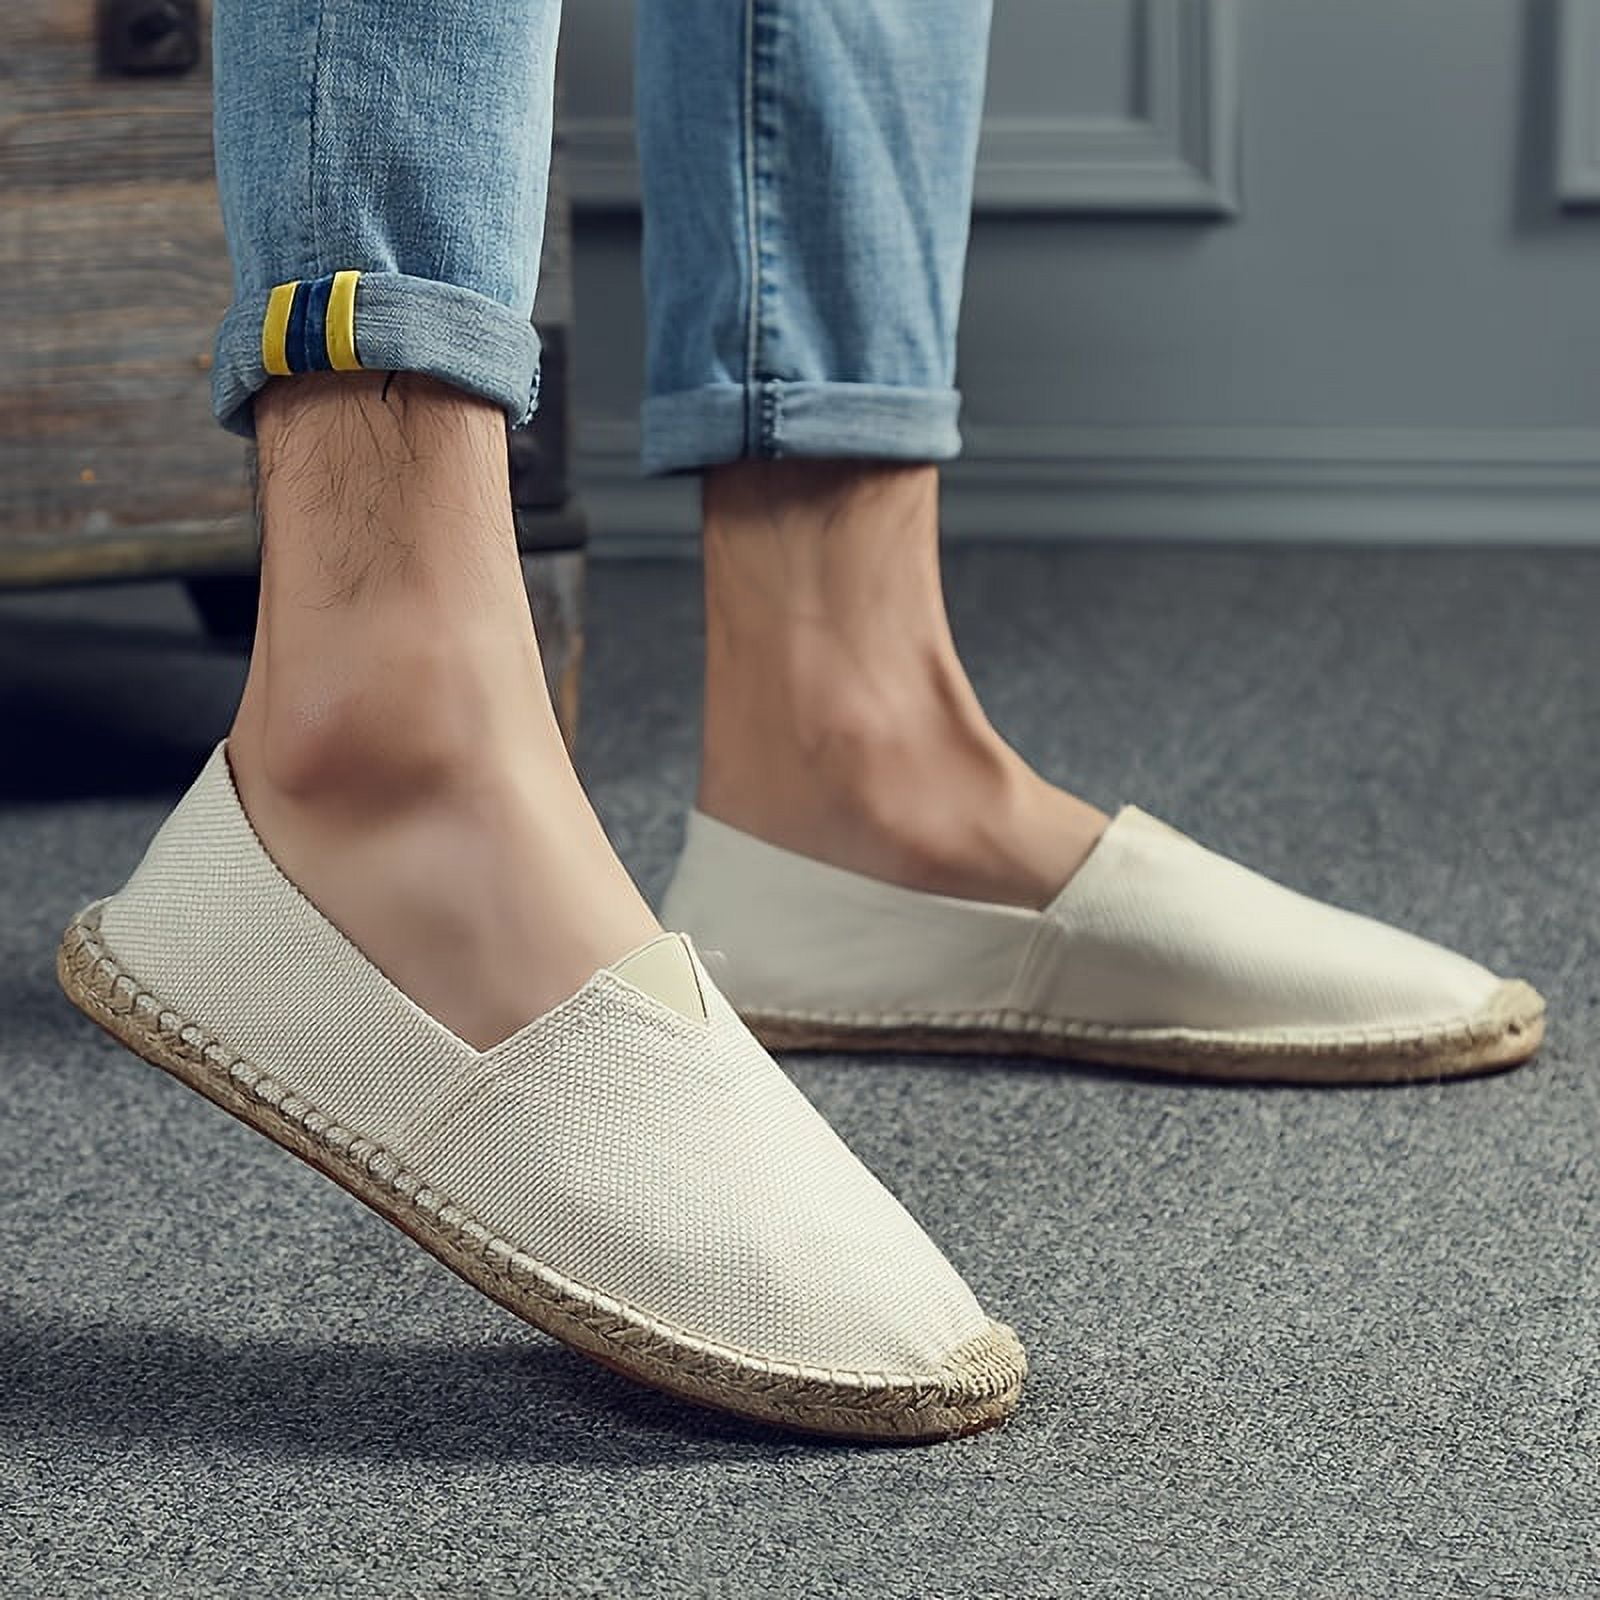 Men's Slip-On Espadrilles: Comfortable Round Toe Casual Shoes for ...